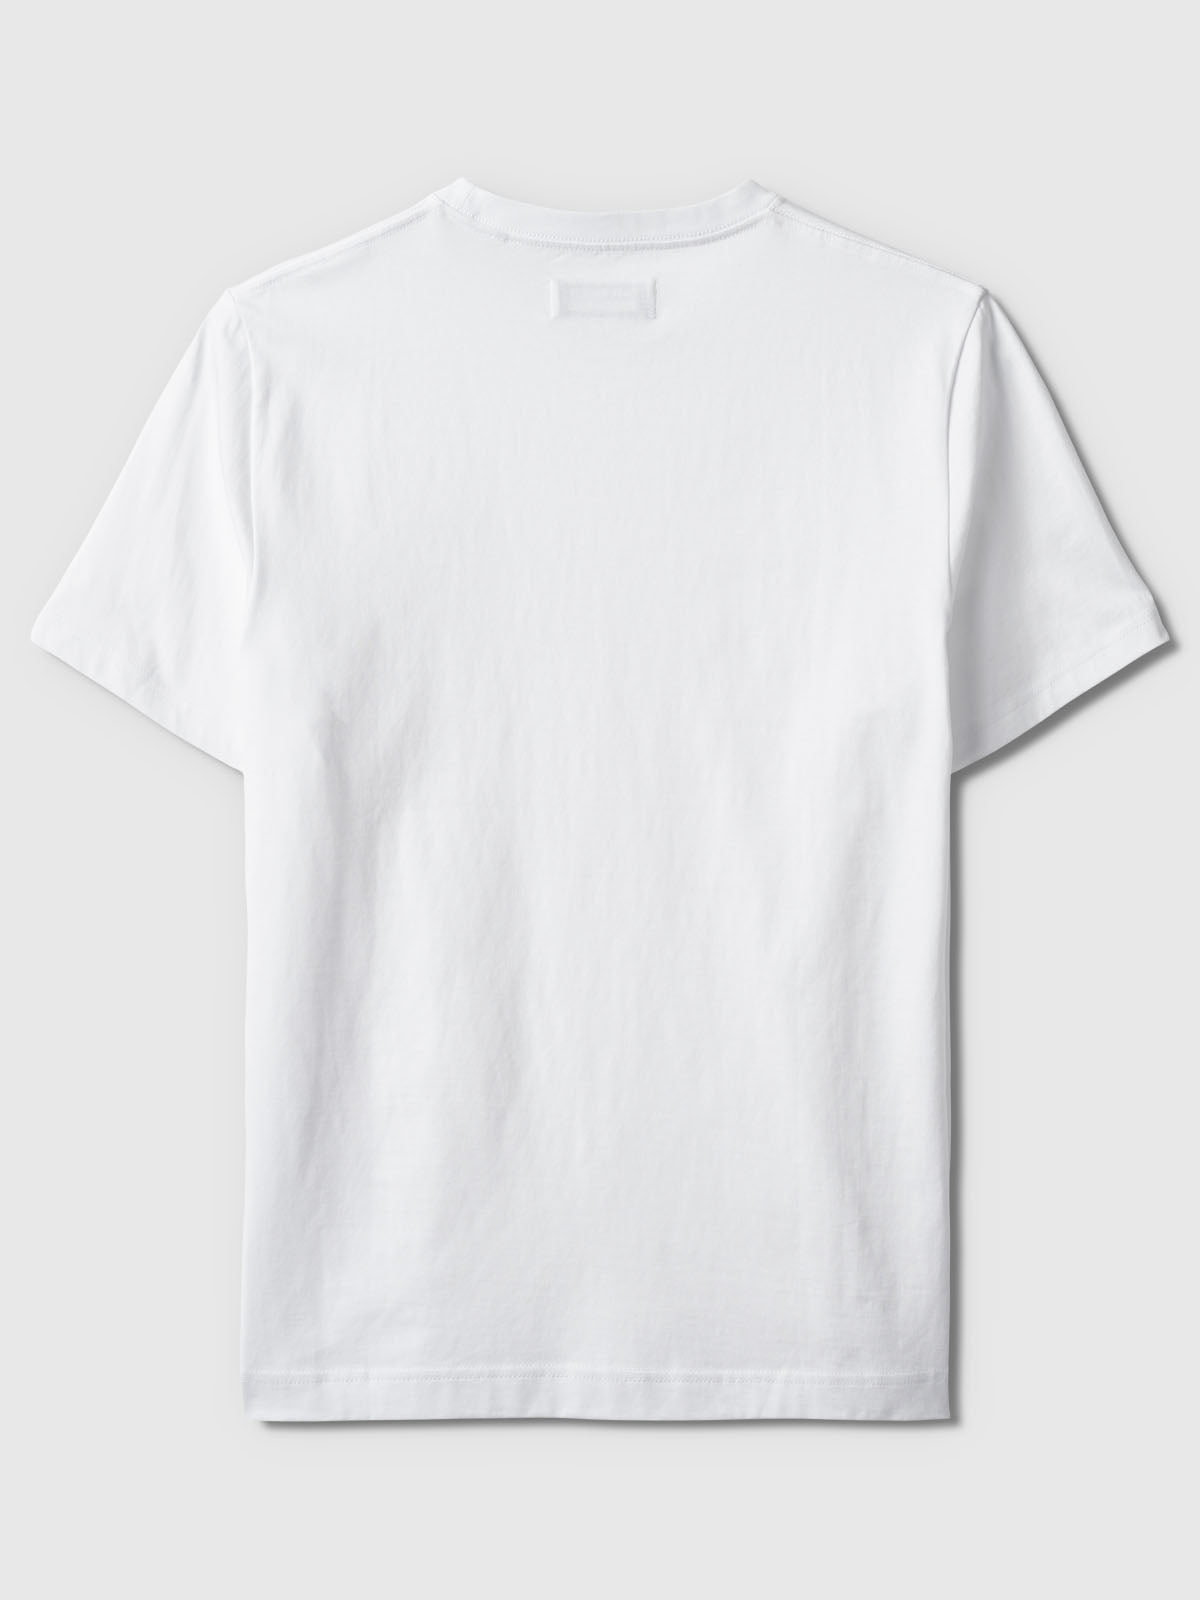 Dune Logo Ss Gots - White - The Sons online